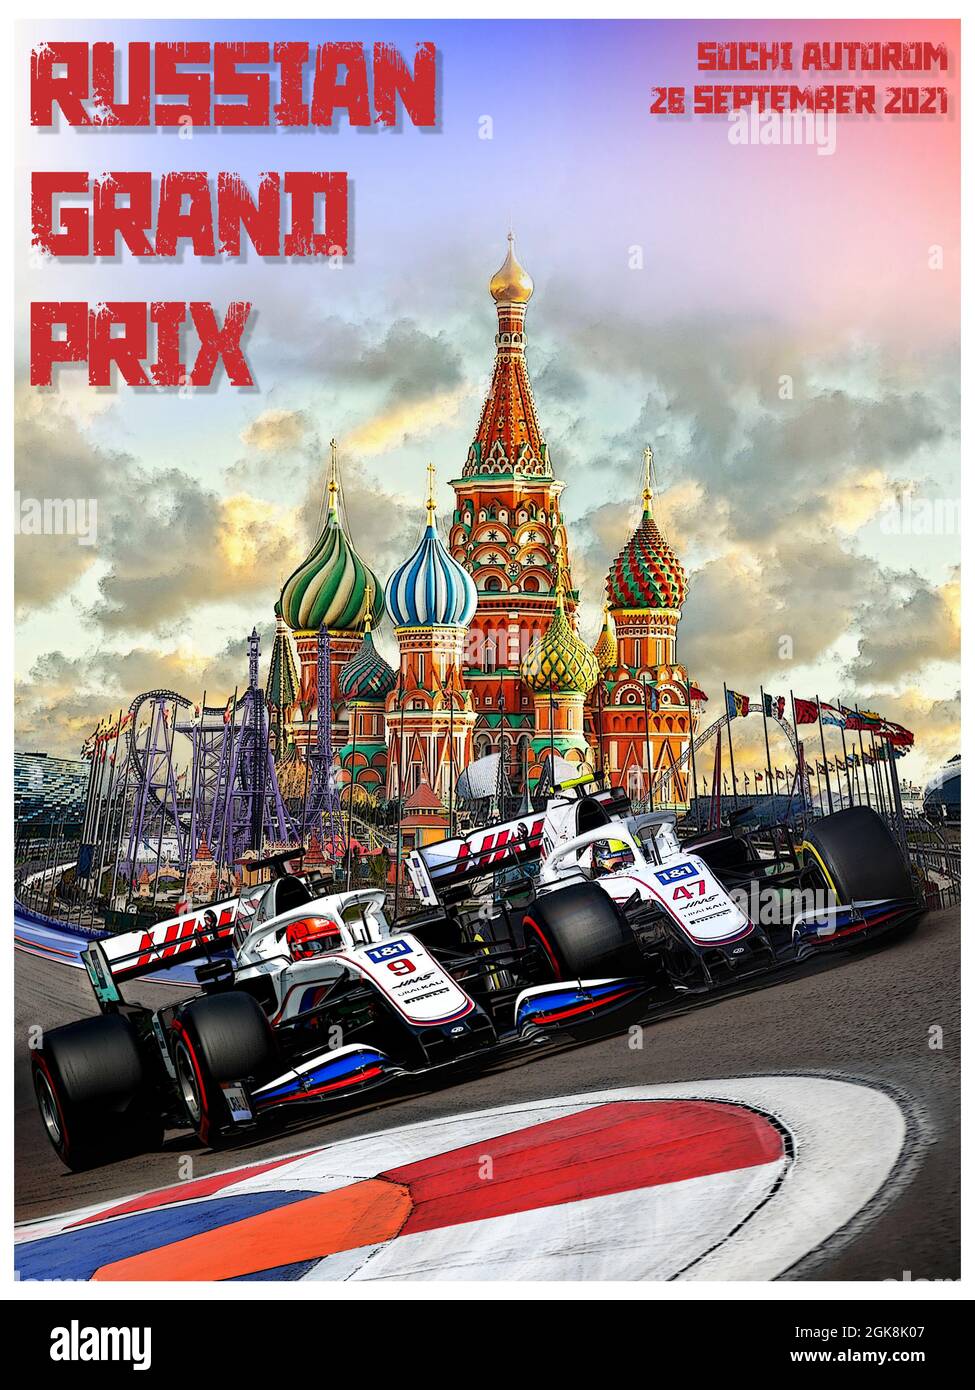 Russian F1 Grand Prix Race Weekend Poster Stock Photo